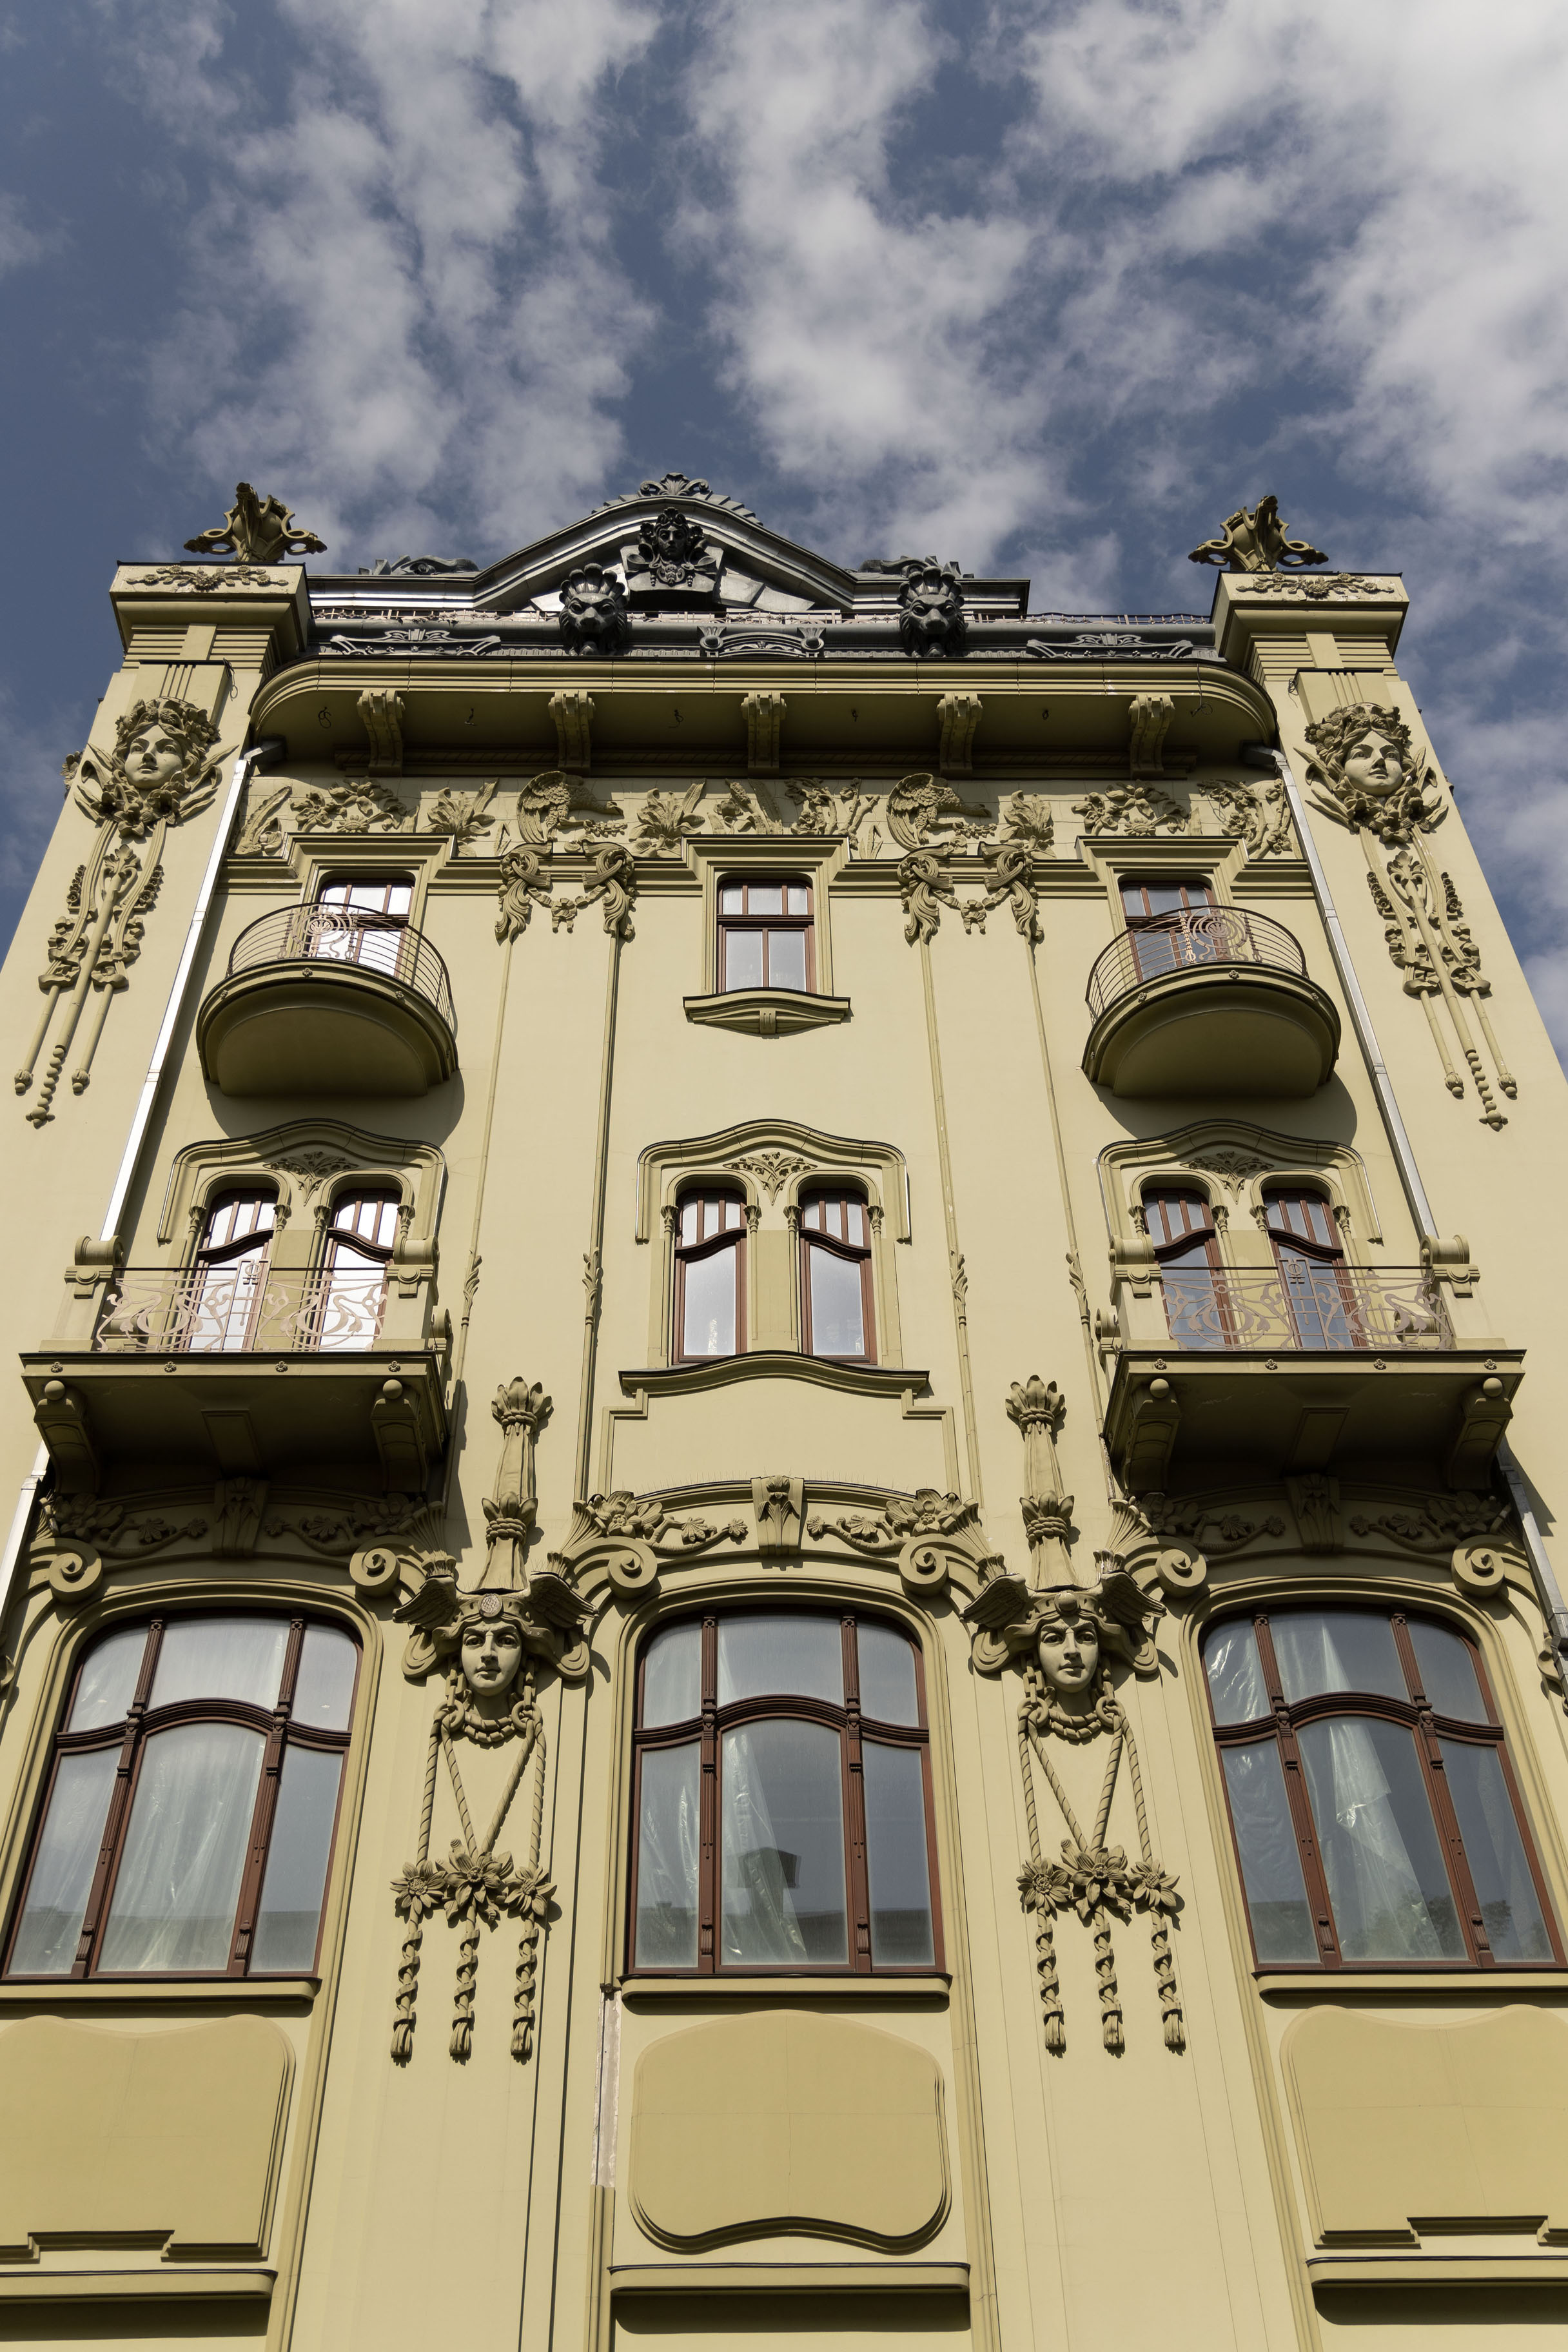 Picture of Looking up one of the many elegant buildings in OdesaOdesa - Ukraine